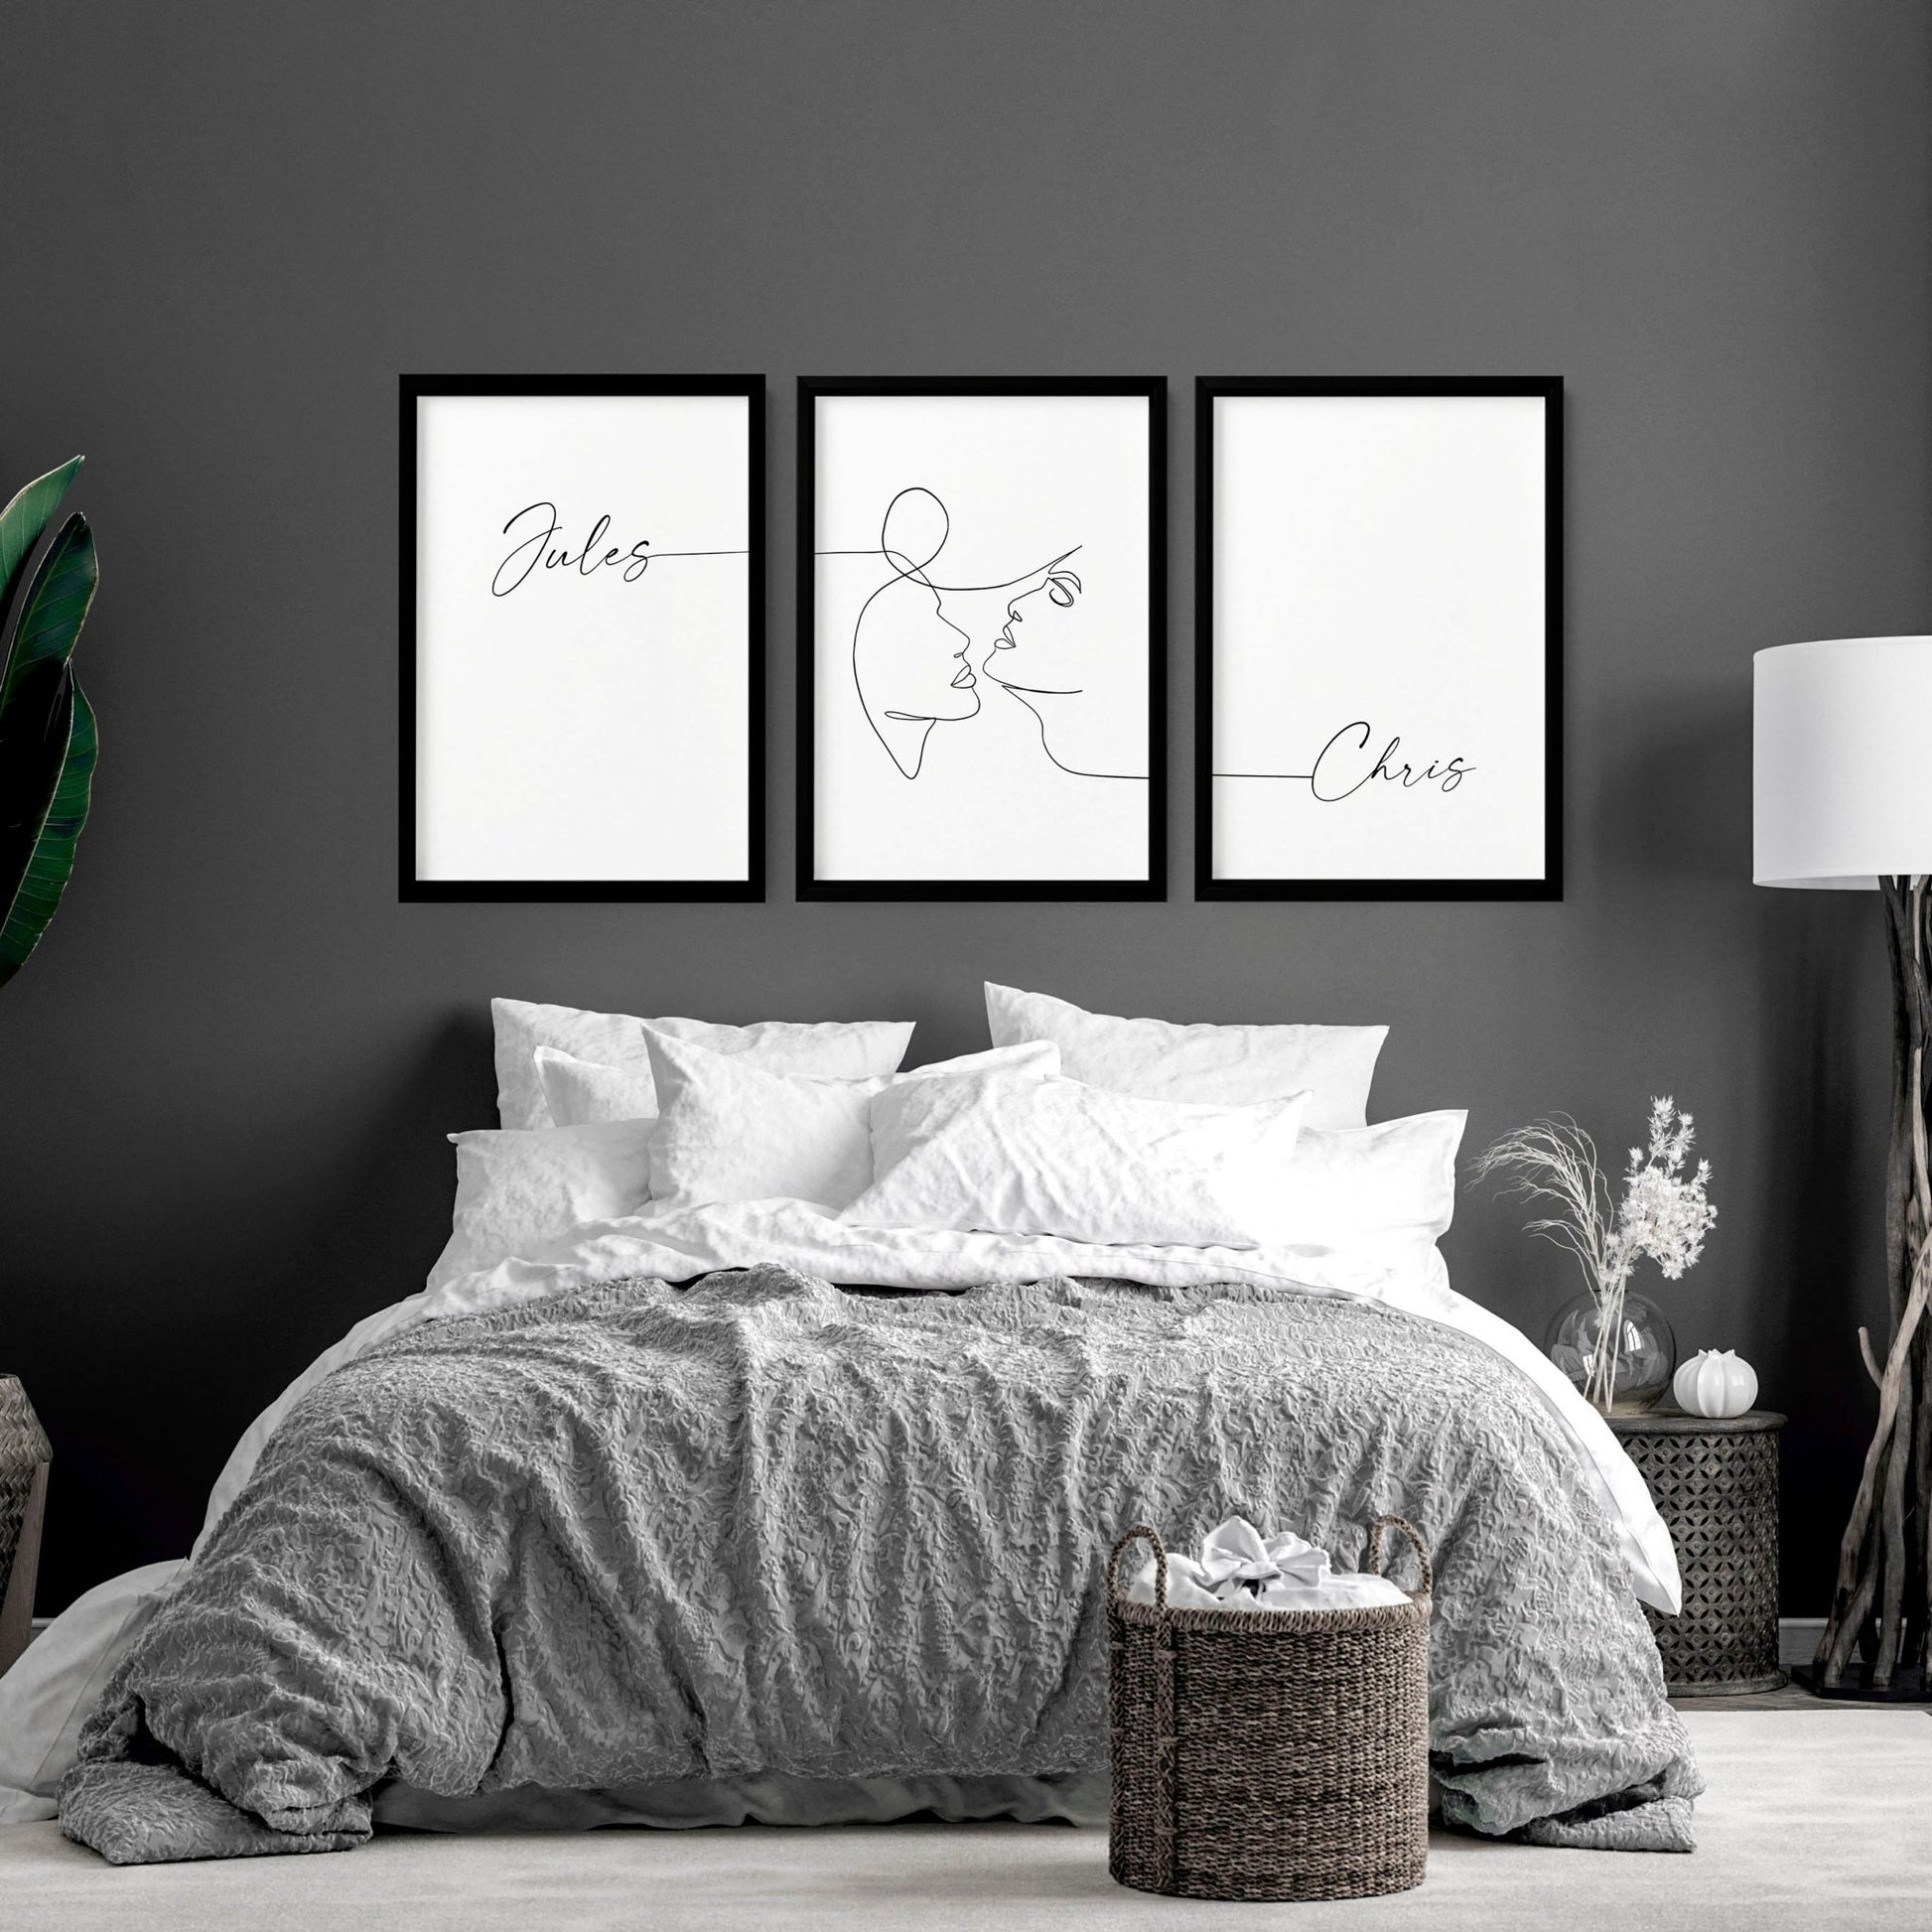 Custom valentines gift | set of 3 wall art prints for Bedroom - About Wall Art